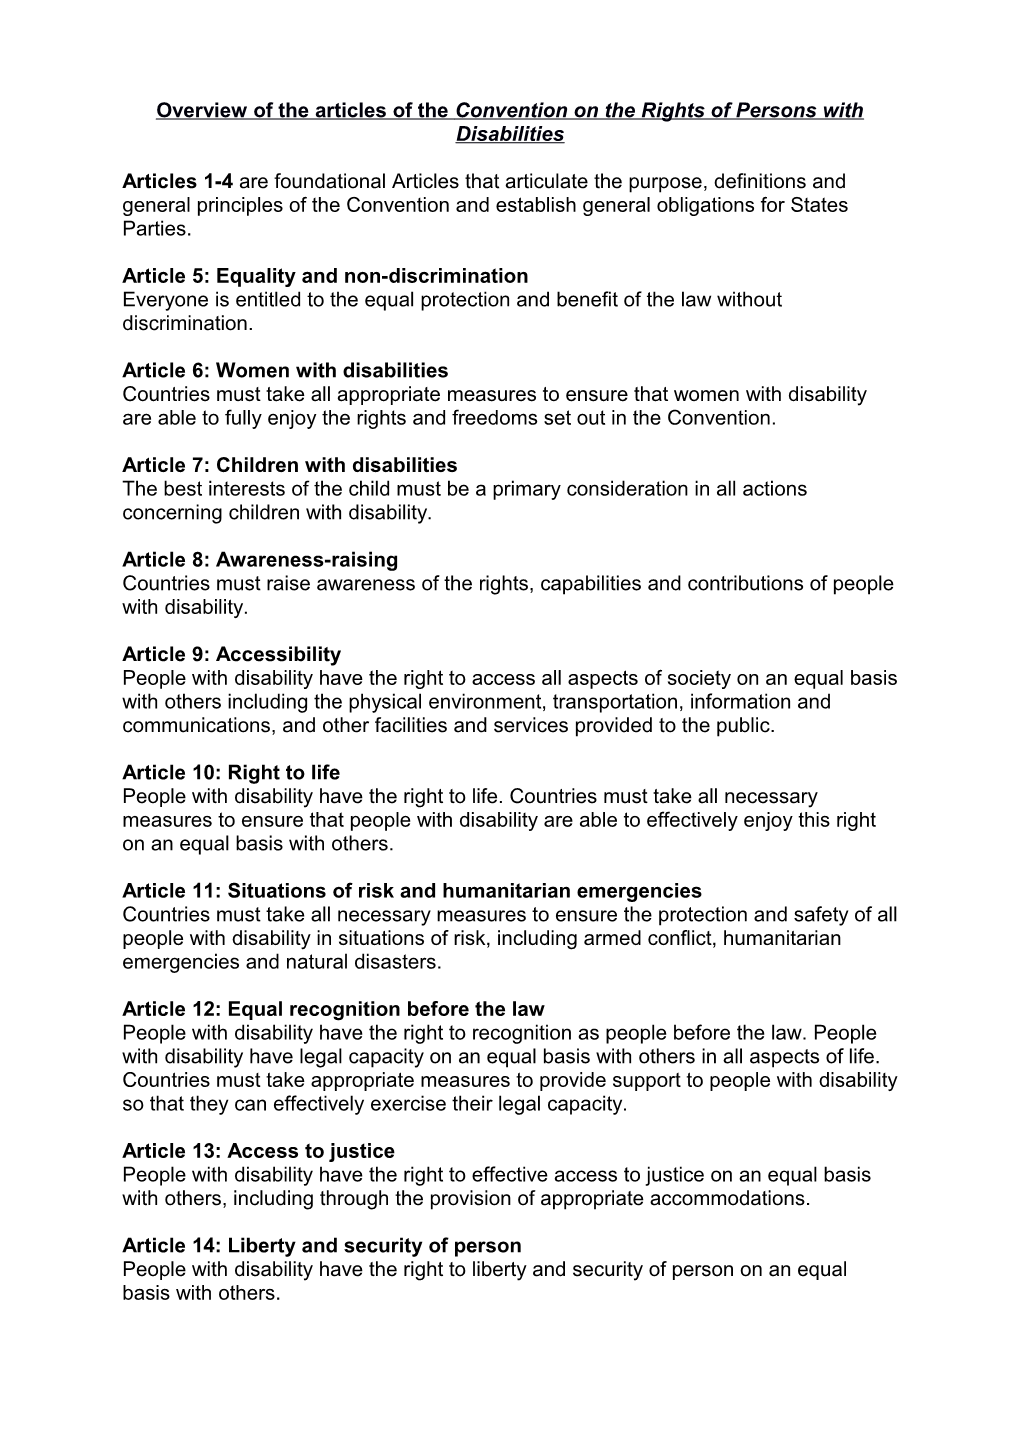 Overview of the Articles of Theconvention on the Rights of Persons with Disabilities